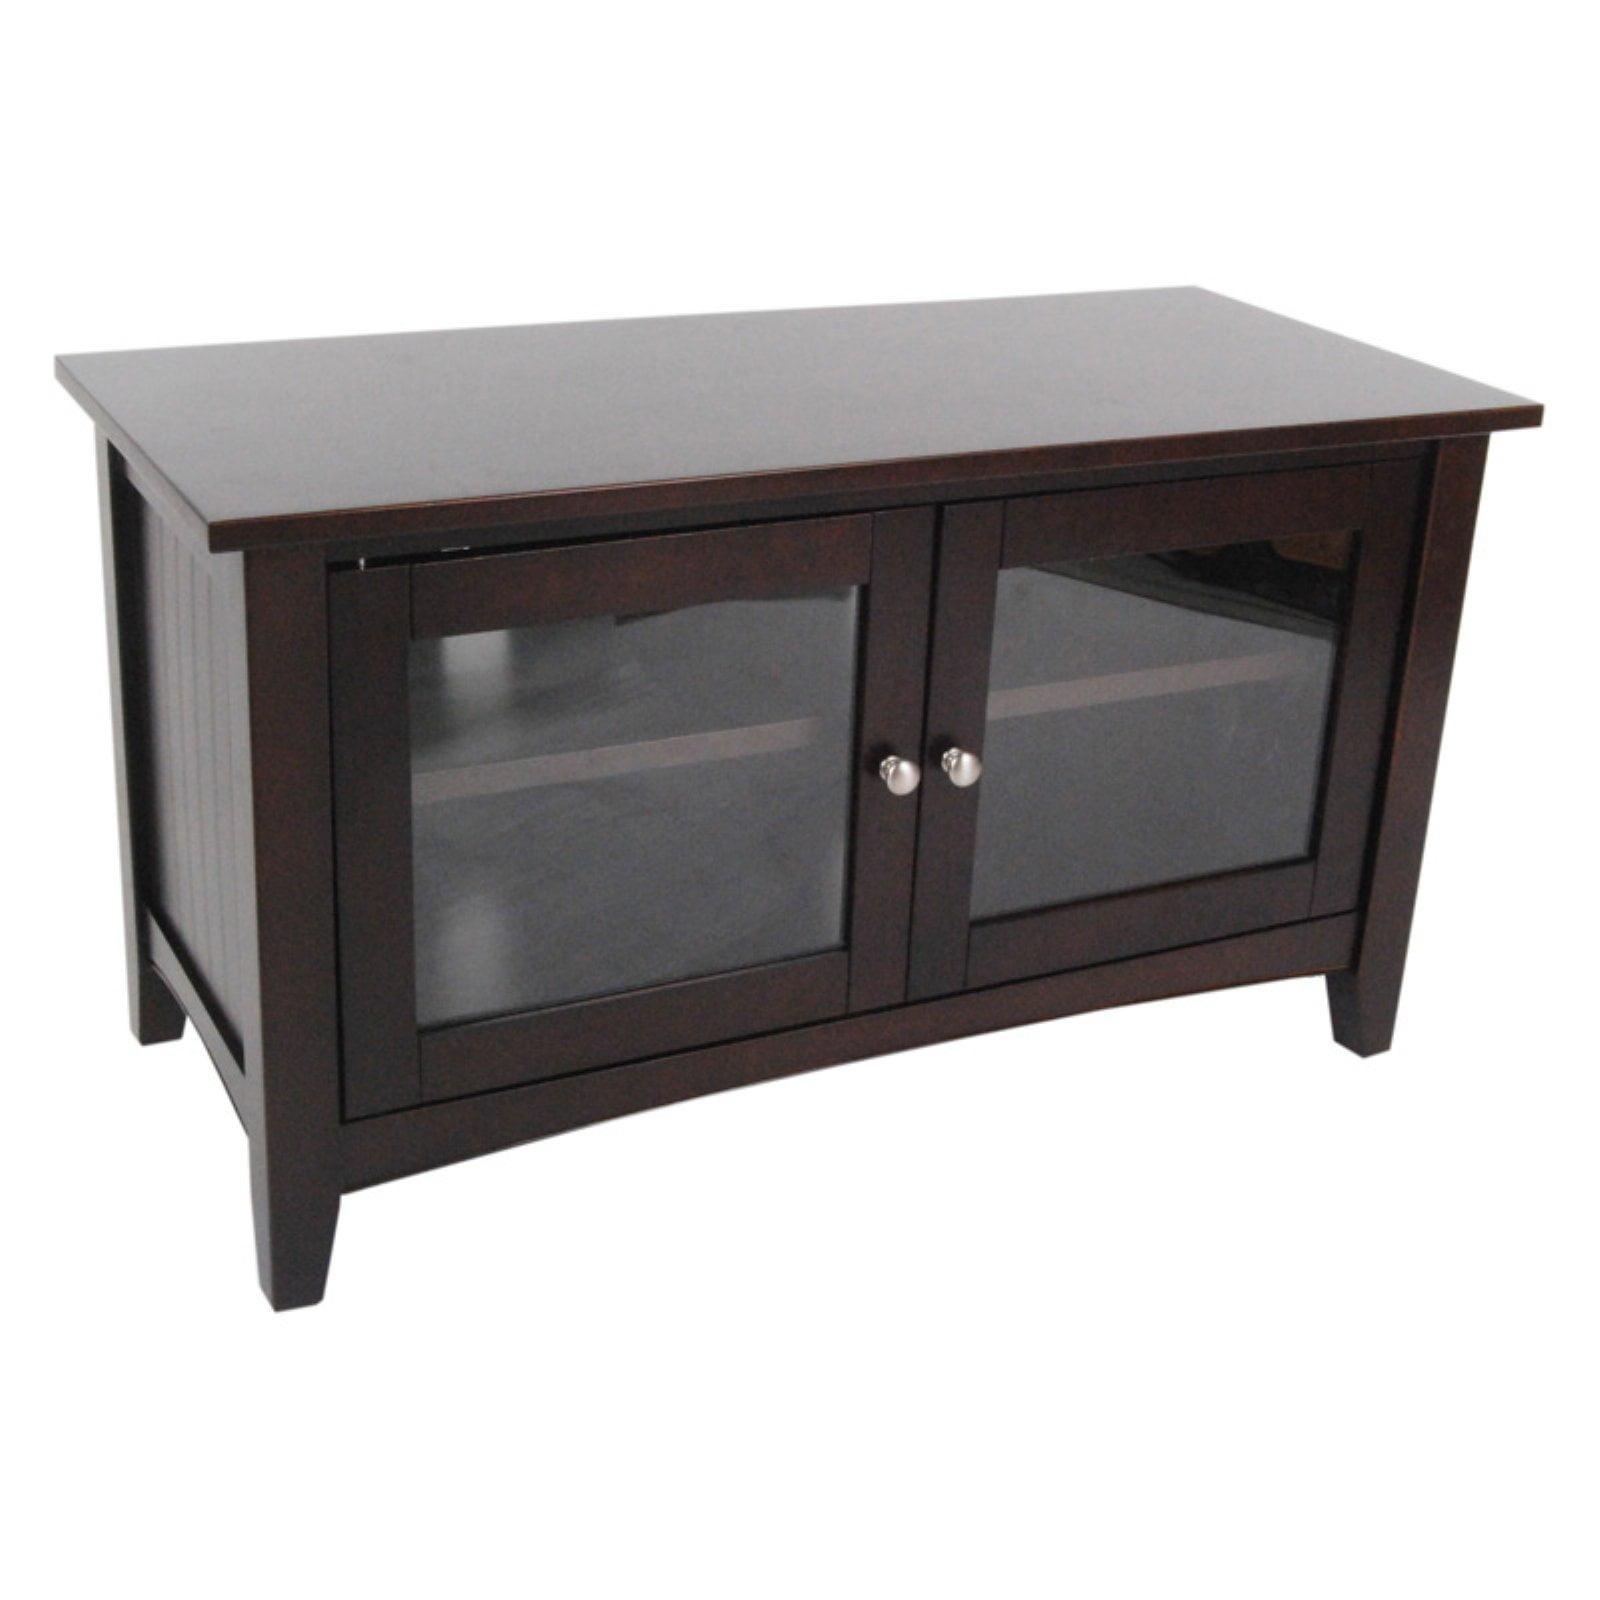 Transitional Shaker Cottage 36" Espresso TV Stand with Glass Cabinet